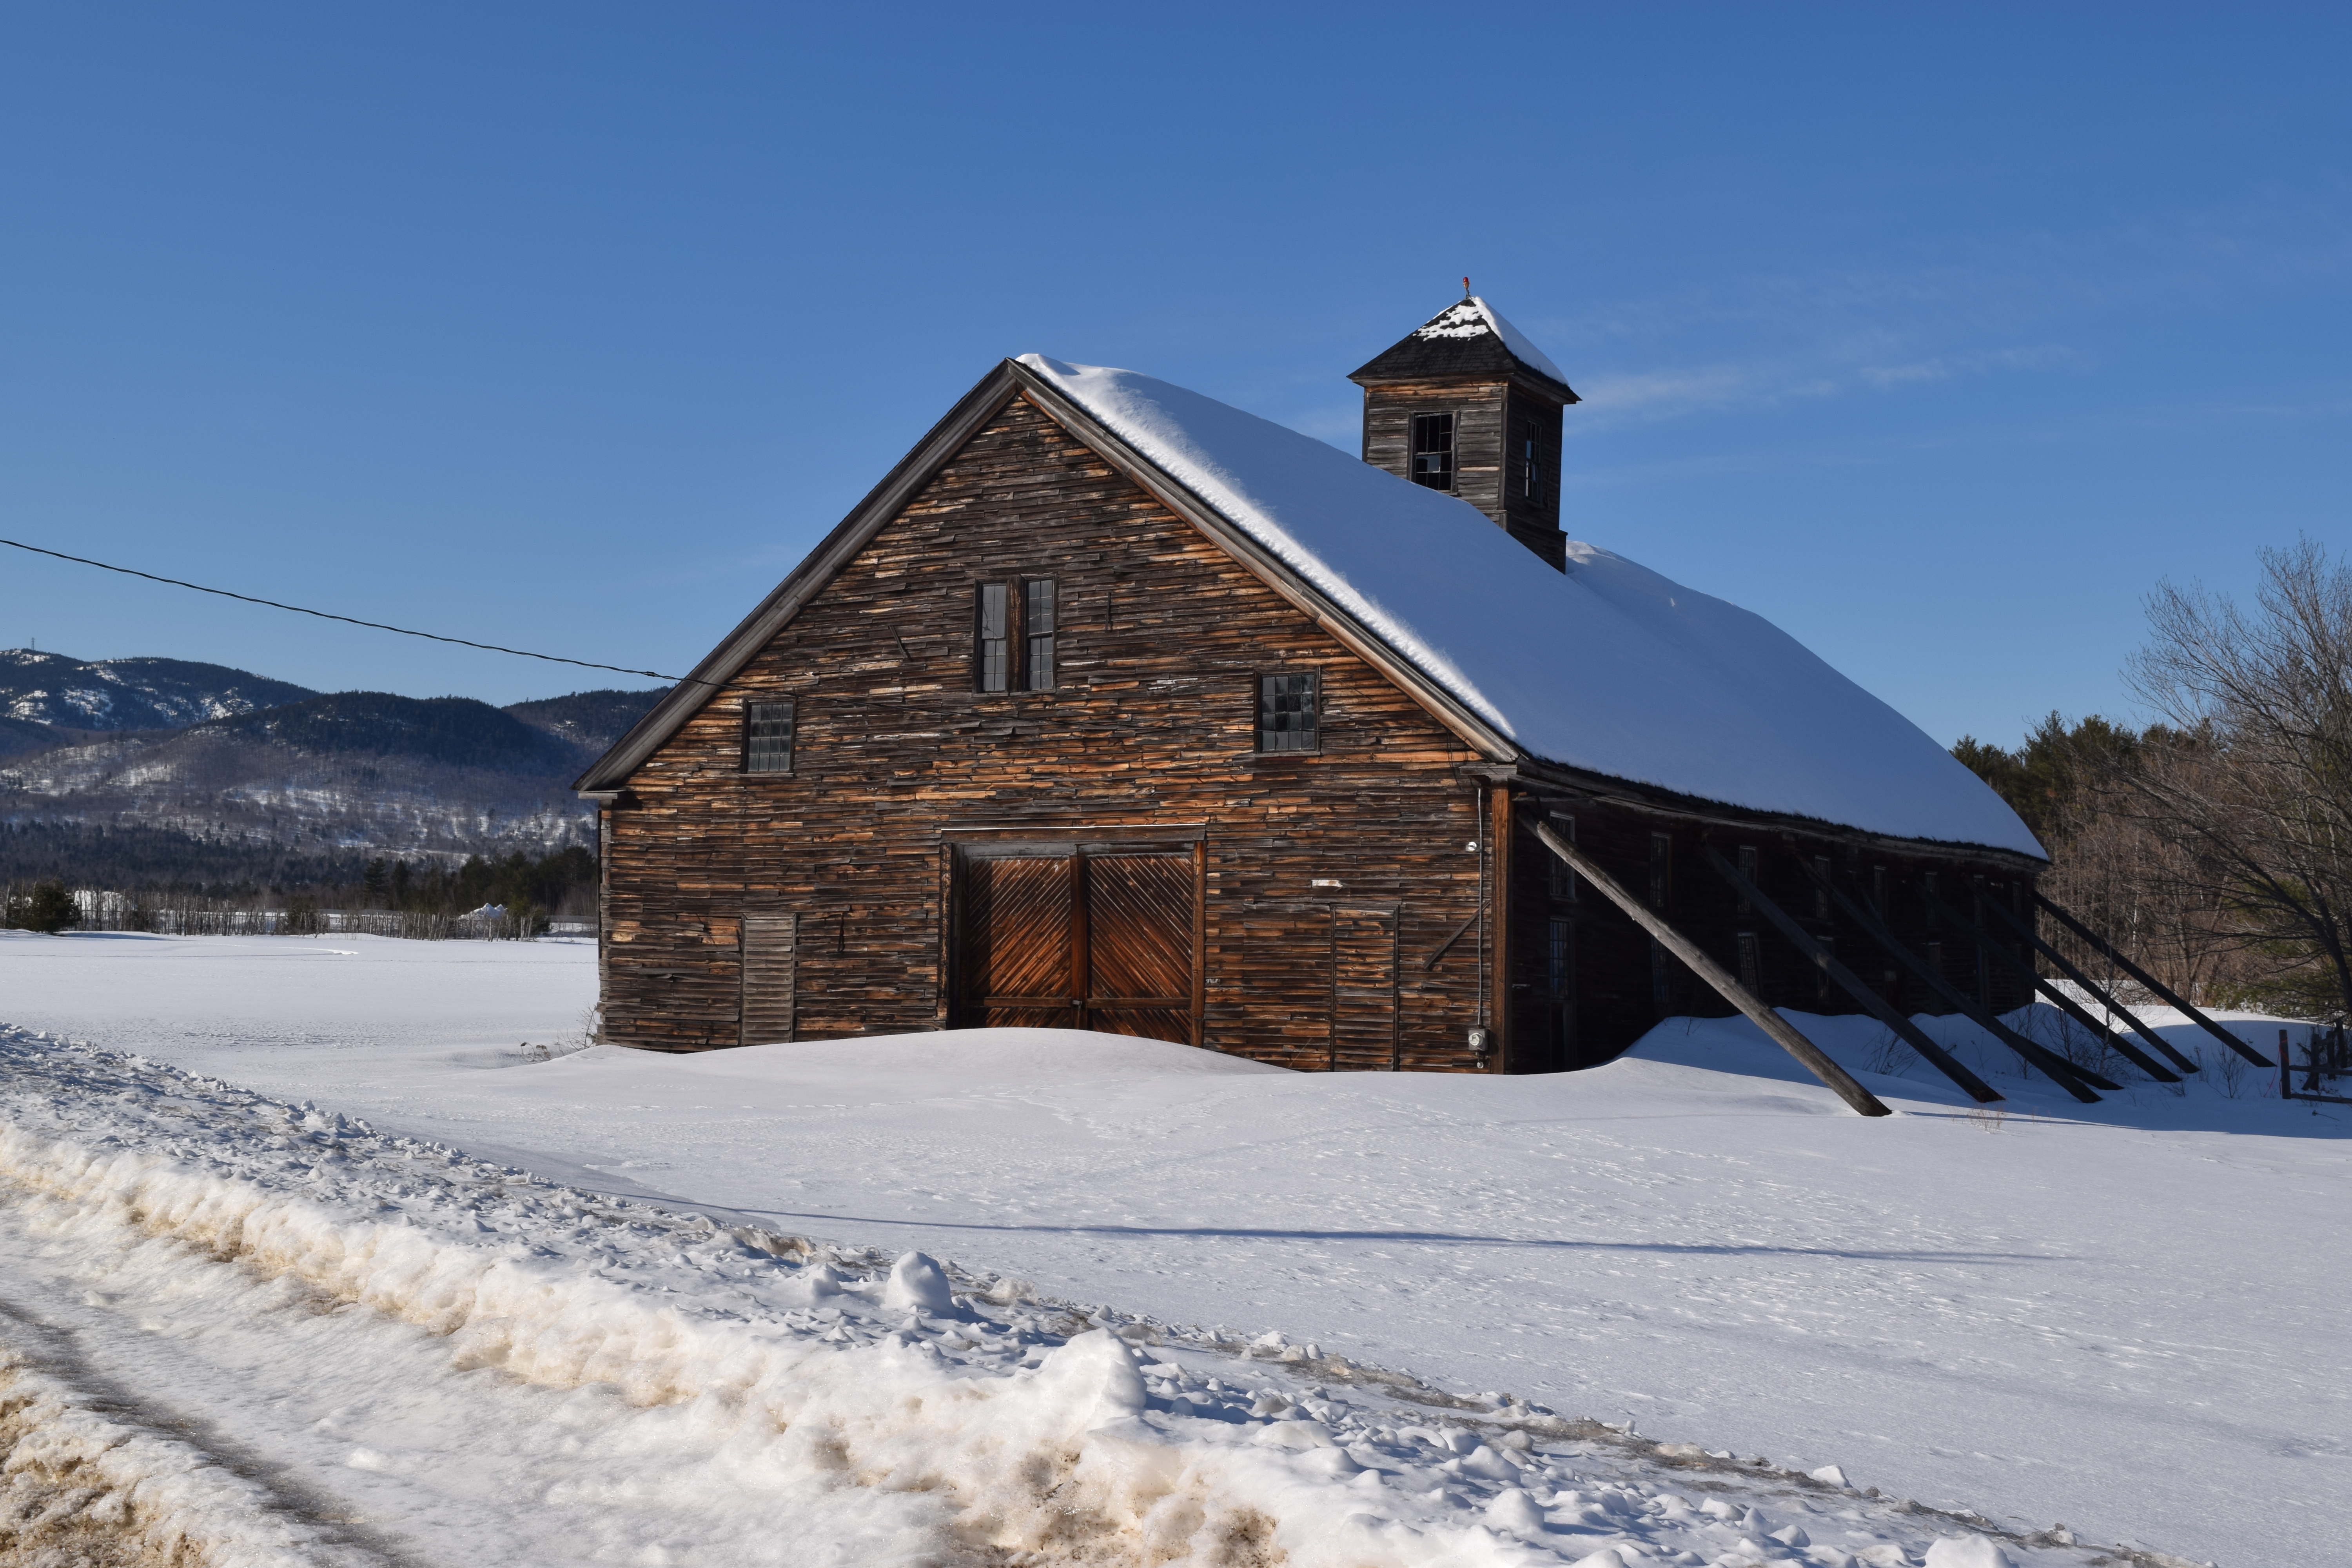 Classic Barn photographed by the Environmental Protection Agency in 1973, still stands in 2019